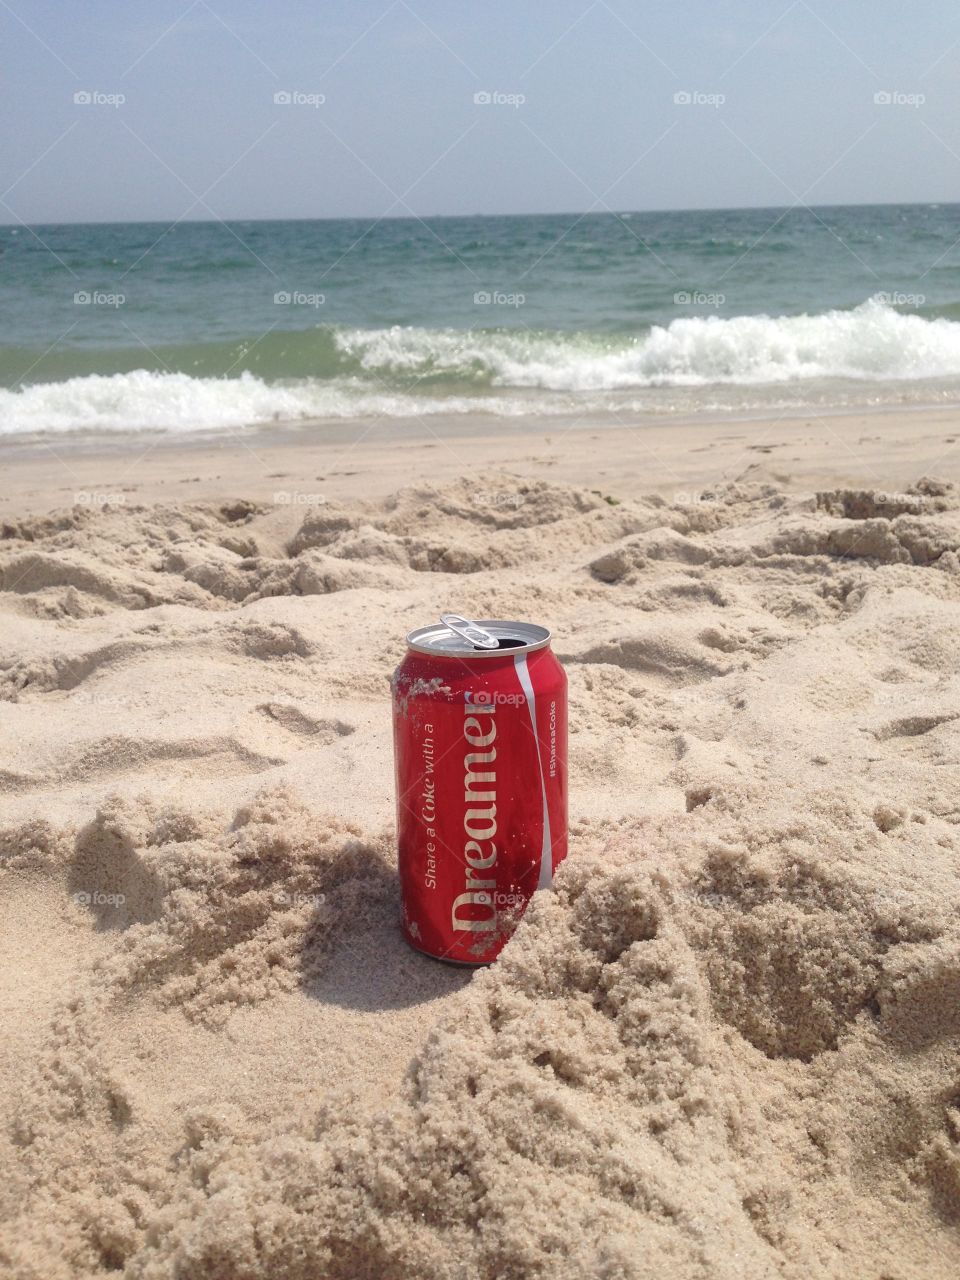 Sharing a Coke with a Dreamer